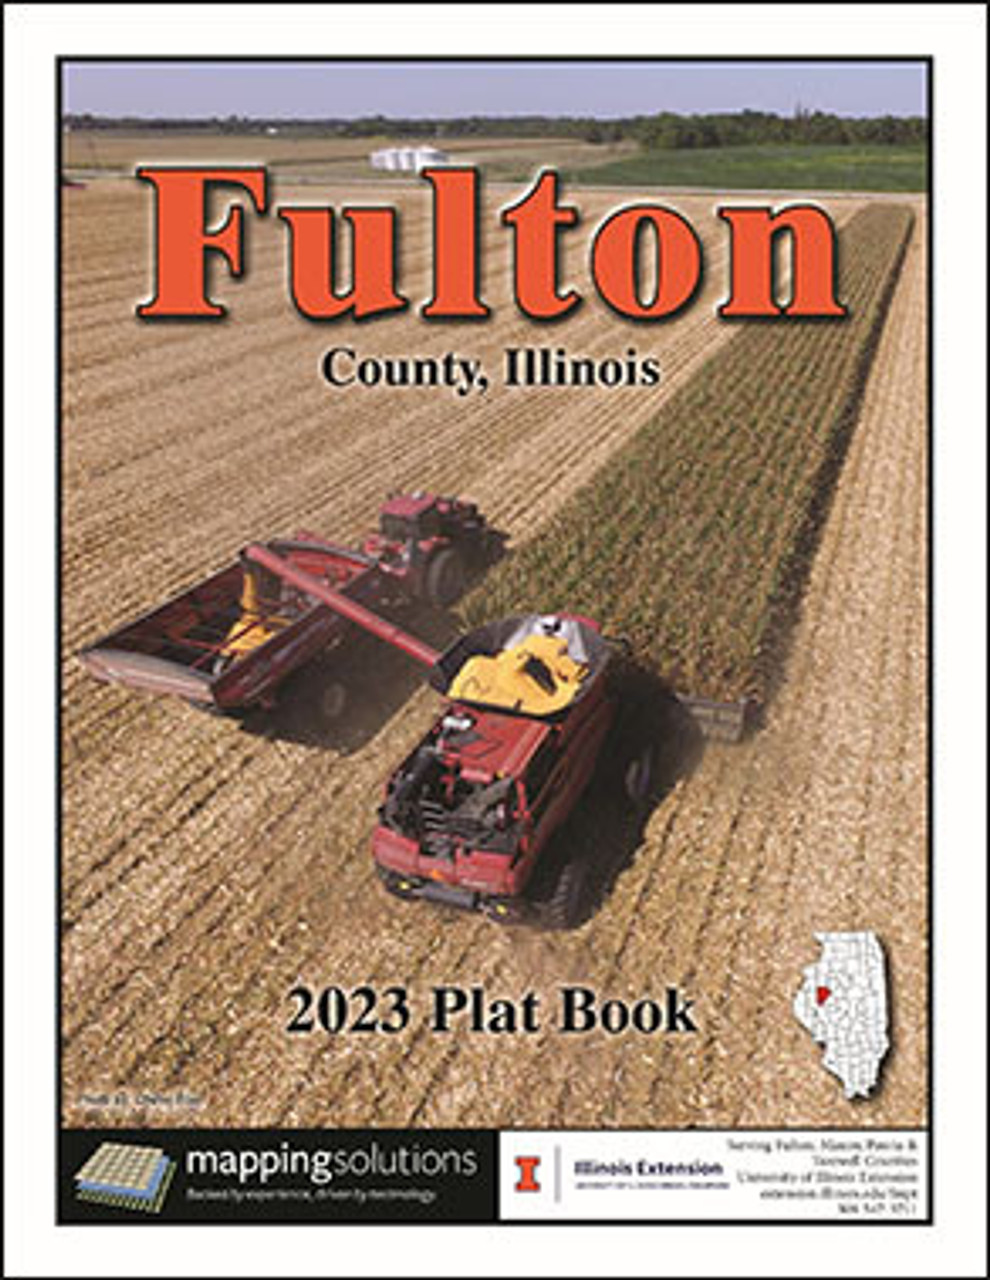 Fulton County Illinois 2023 Plat Book Mapping Solutions 2687